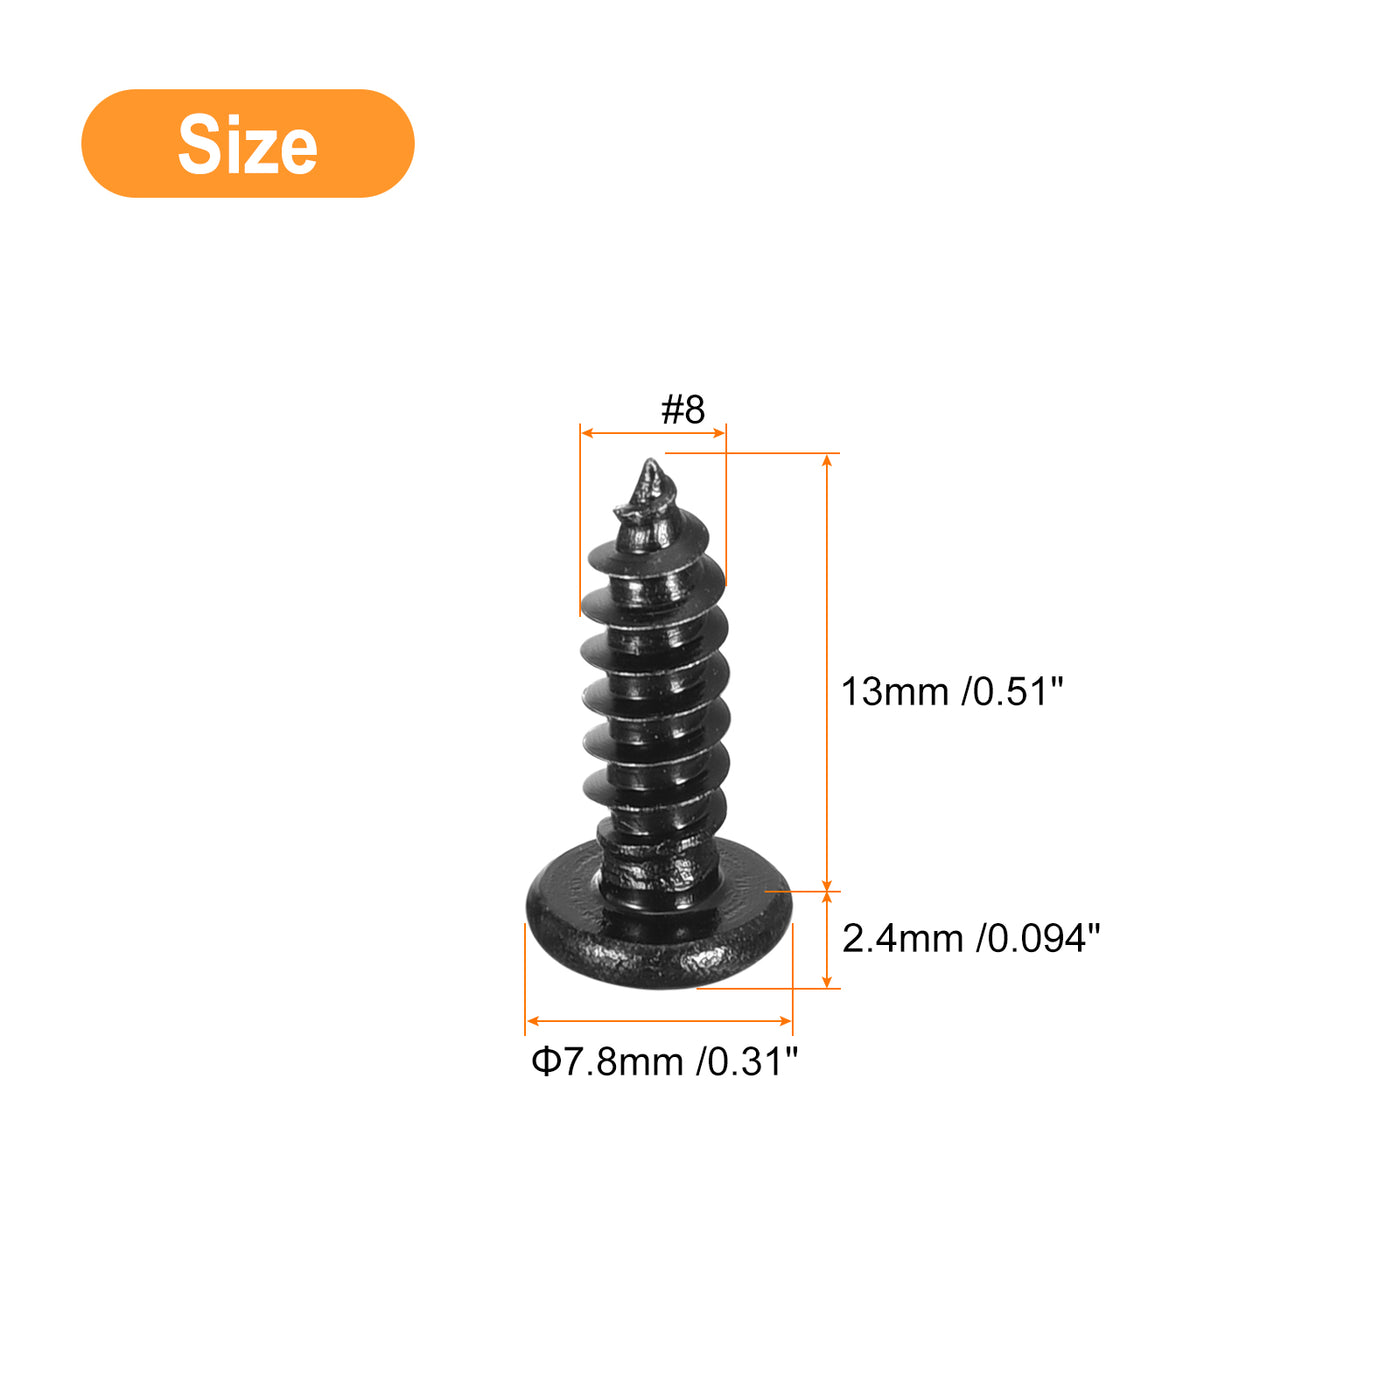 uxcell Uxcell #8 x 1/2" Phillips Pan Head Self-tapping Screw, 100pcs - 304 Stainless Steel Round Head Wood Screw Full Thread (Black)